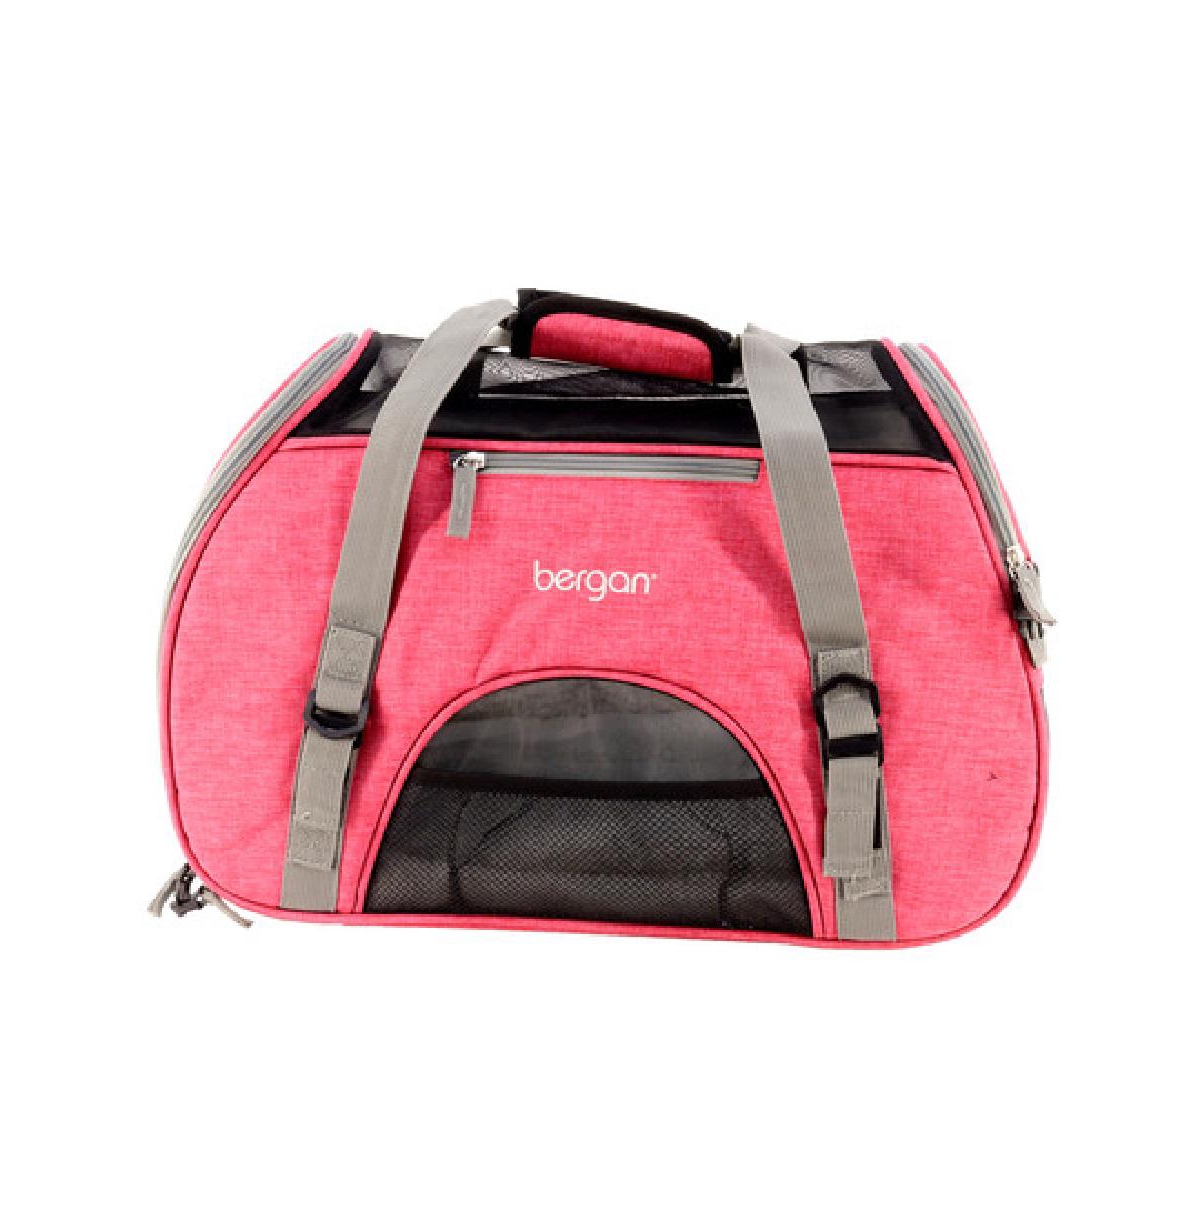 Pet Bergan - Comfort Carrier for Cat, Dog and Other Pets - Heather Berry (16 x 8 x 11 Inches) - Bright pink